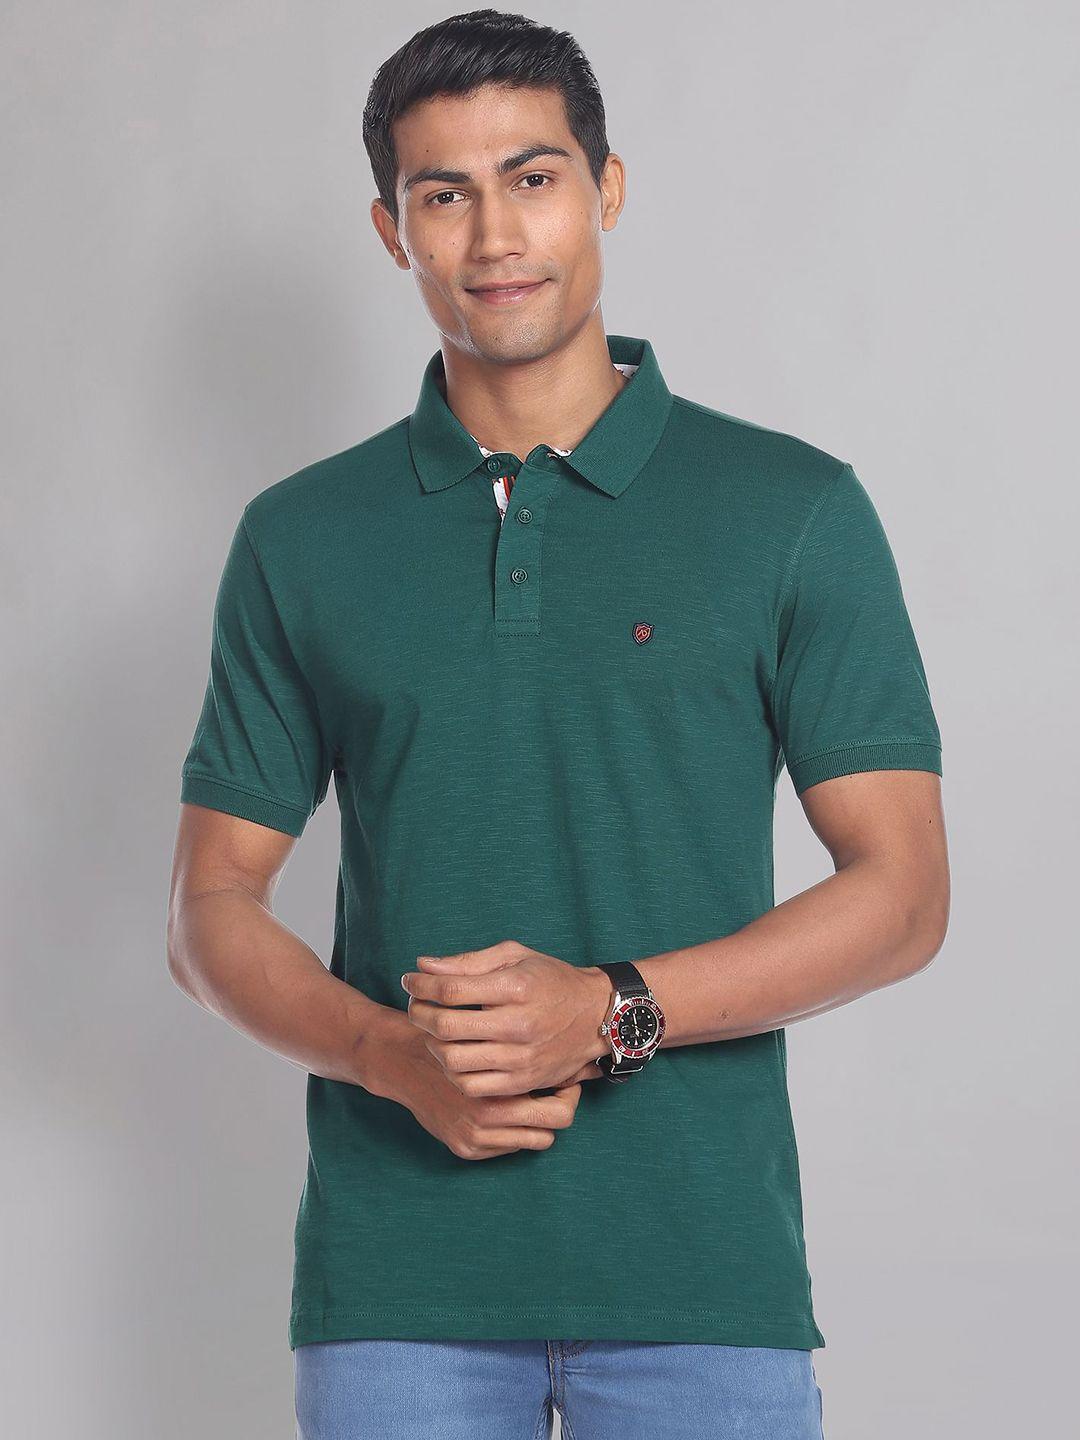 ad by arvind polo collar pure cotton slim fit t-shirt